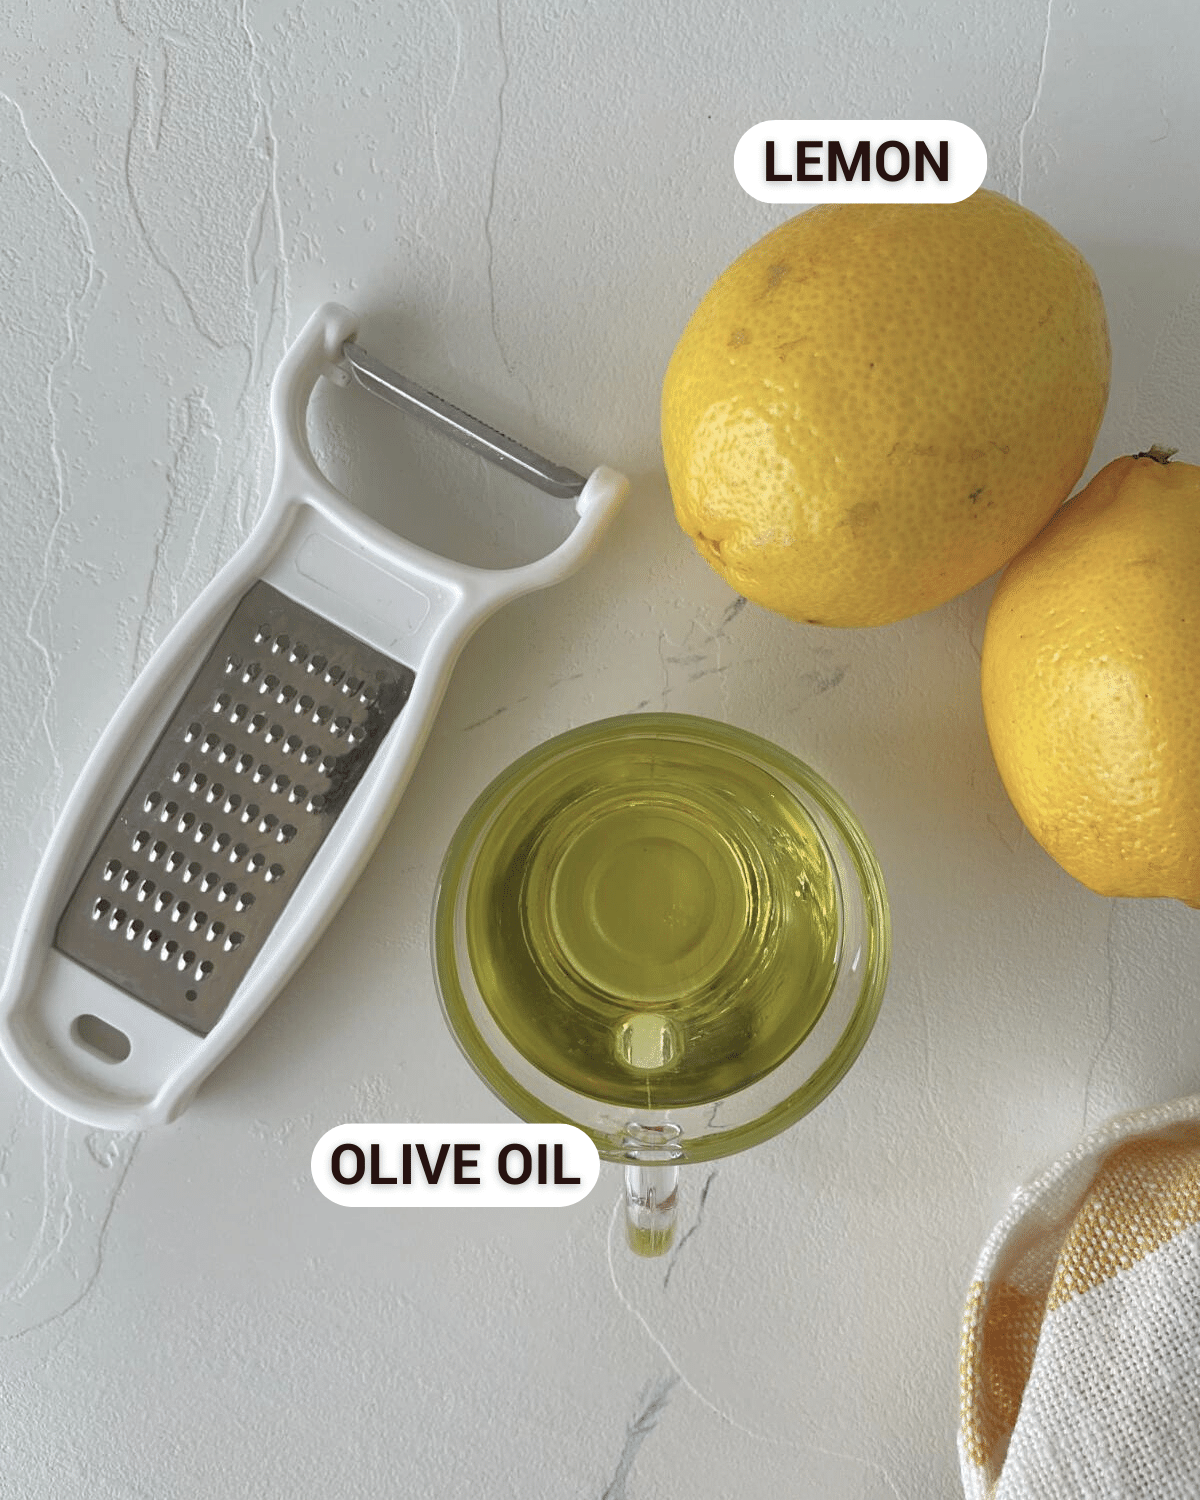 ingredients for the lemon infused olive oil